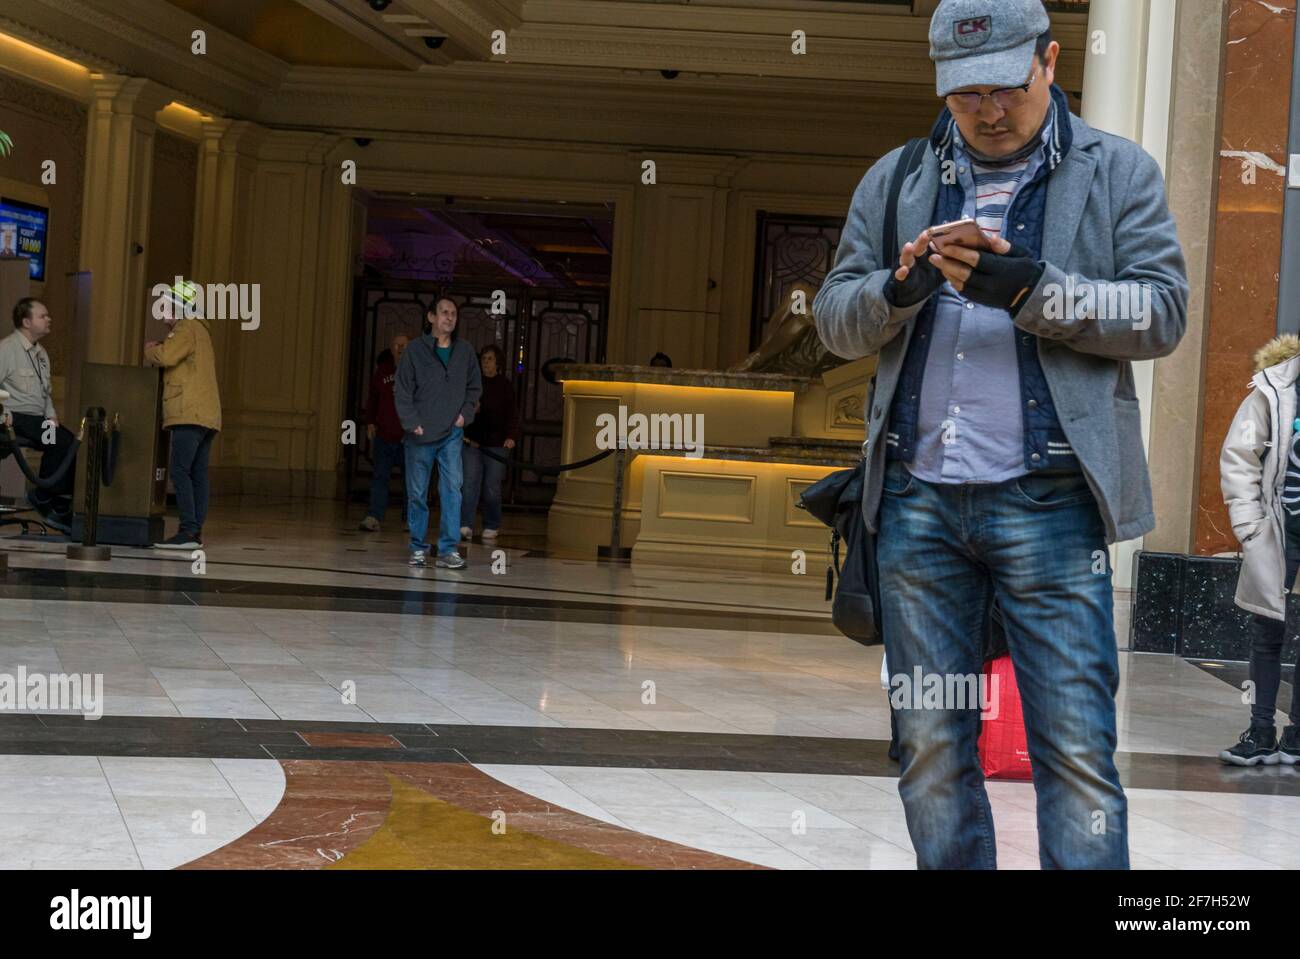 Niagara, Canada, March 2018 - Adult male of asian ethnicity stands at entrance of a reception lounge while checking or texting with his cellphone Stock Photo